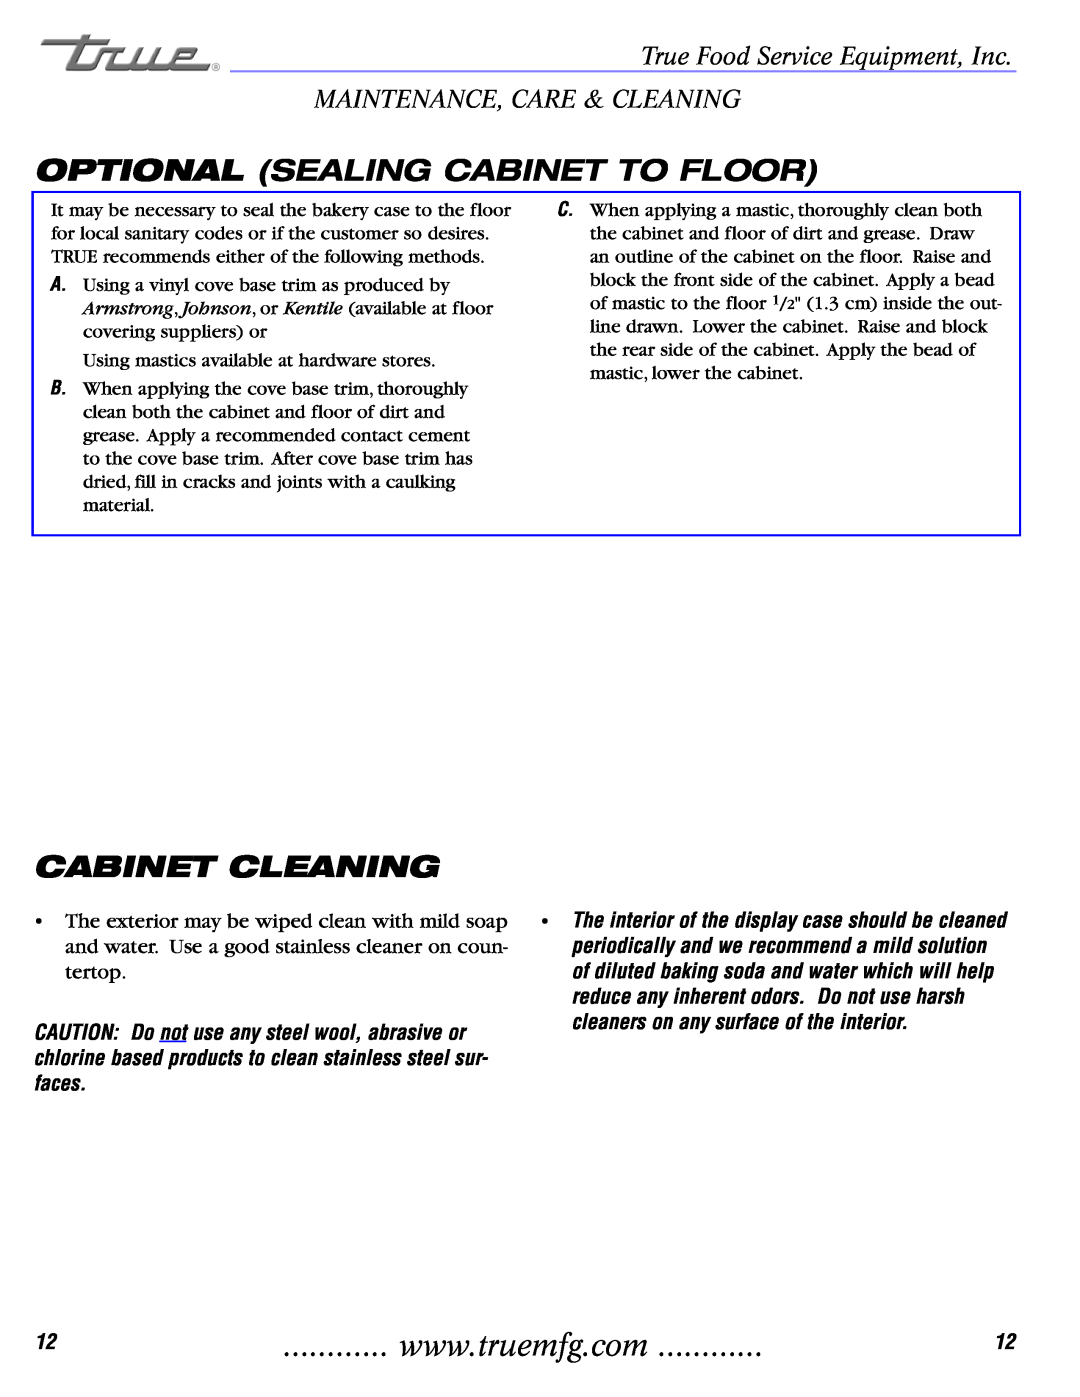 True Manufacturing Company TCGDZ-50 installation manual Optional Sealing Cabinet To Floor, Cabinet Cleaning 